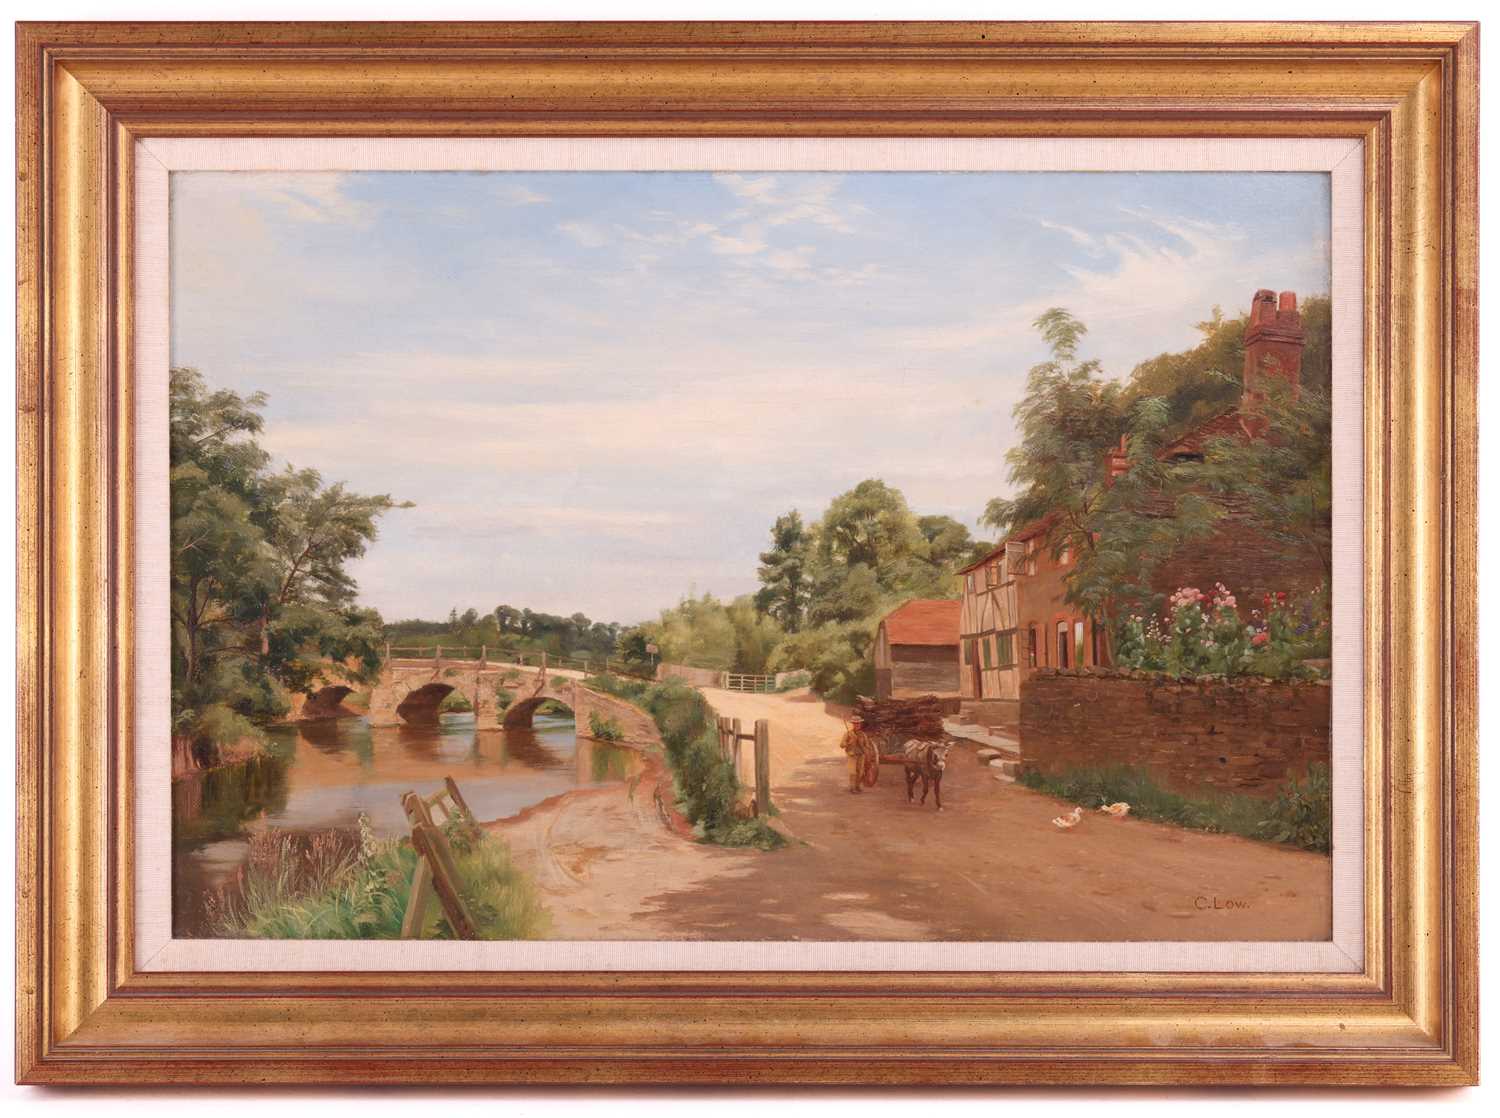 Charles Low (1840 - 1906), The Village Ford, Eashing, Surrey, signed, oil on canvas, 32.5 x 49 cm, f - Image 2 of 8